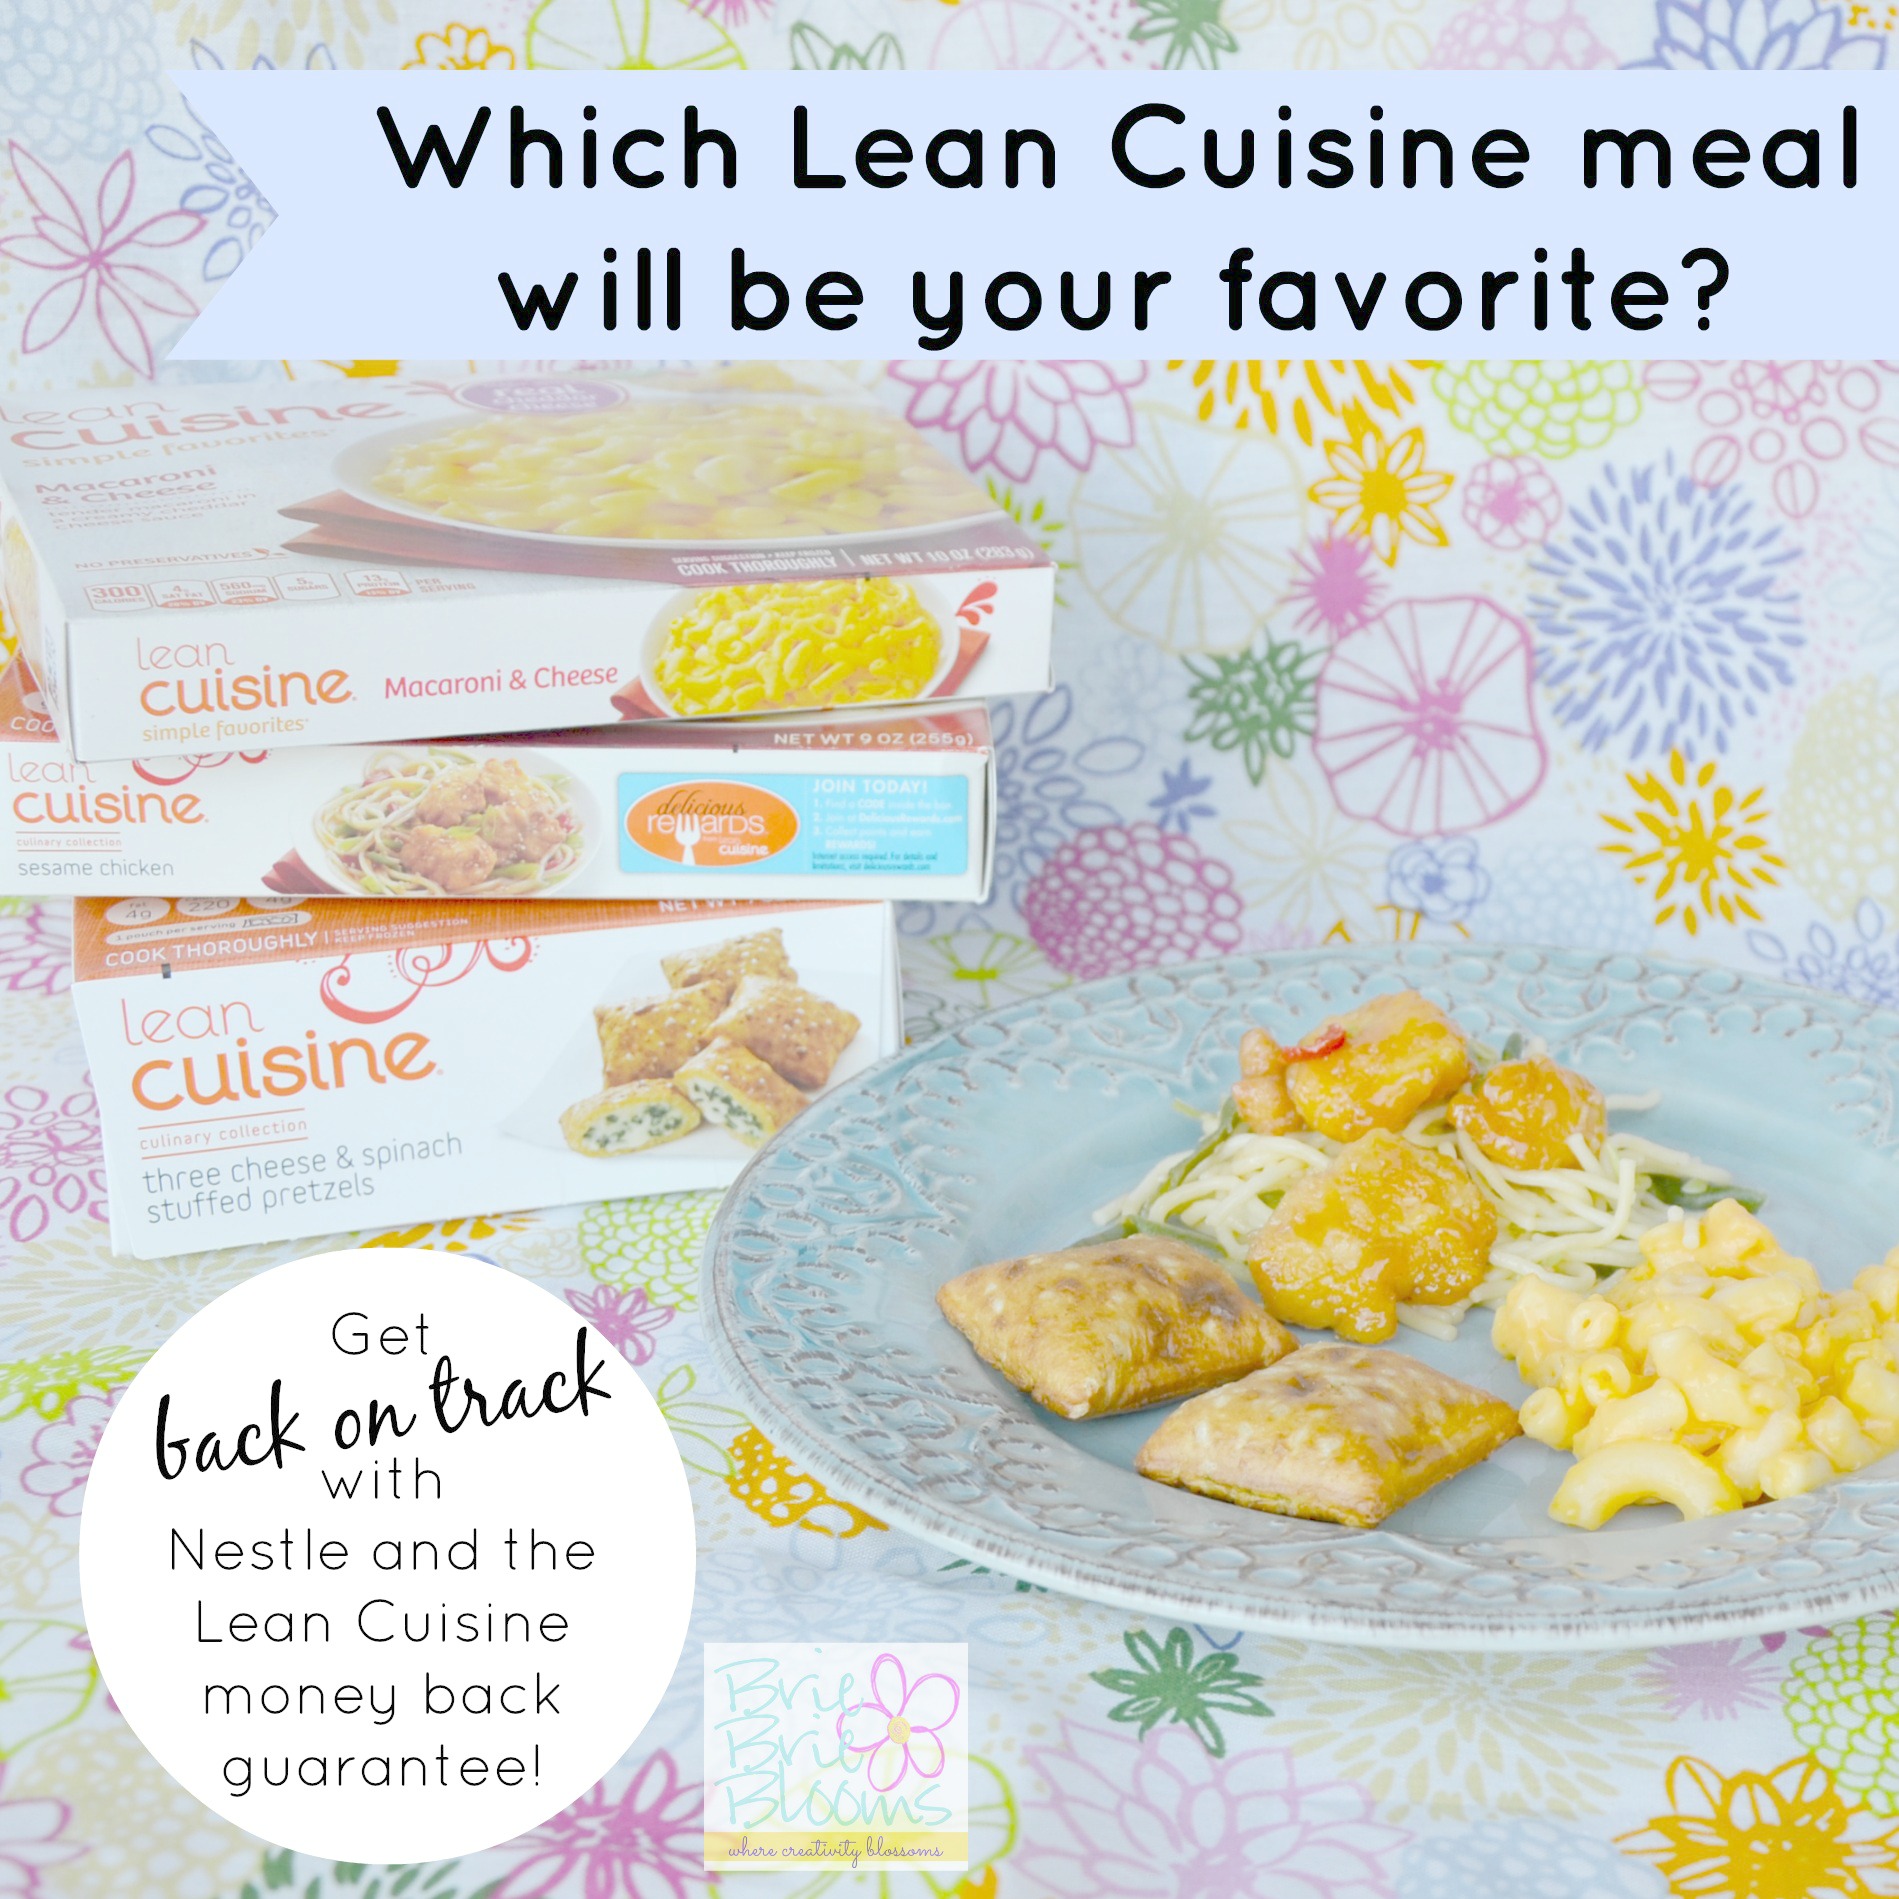 Get back on track with Nestle and the Lean Cuisine money back guarantee #WowThatsGood #shop #cbias